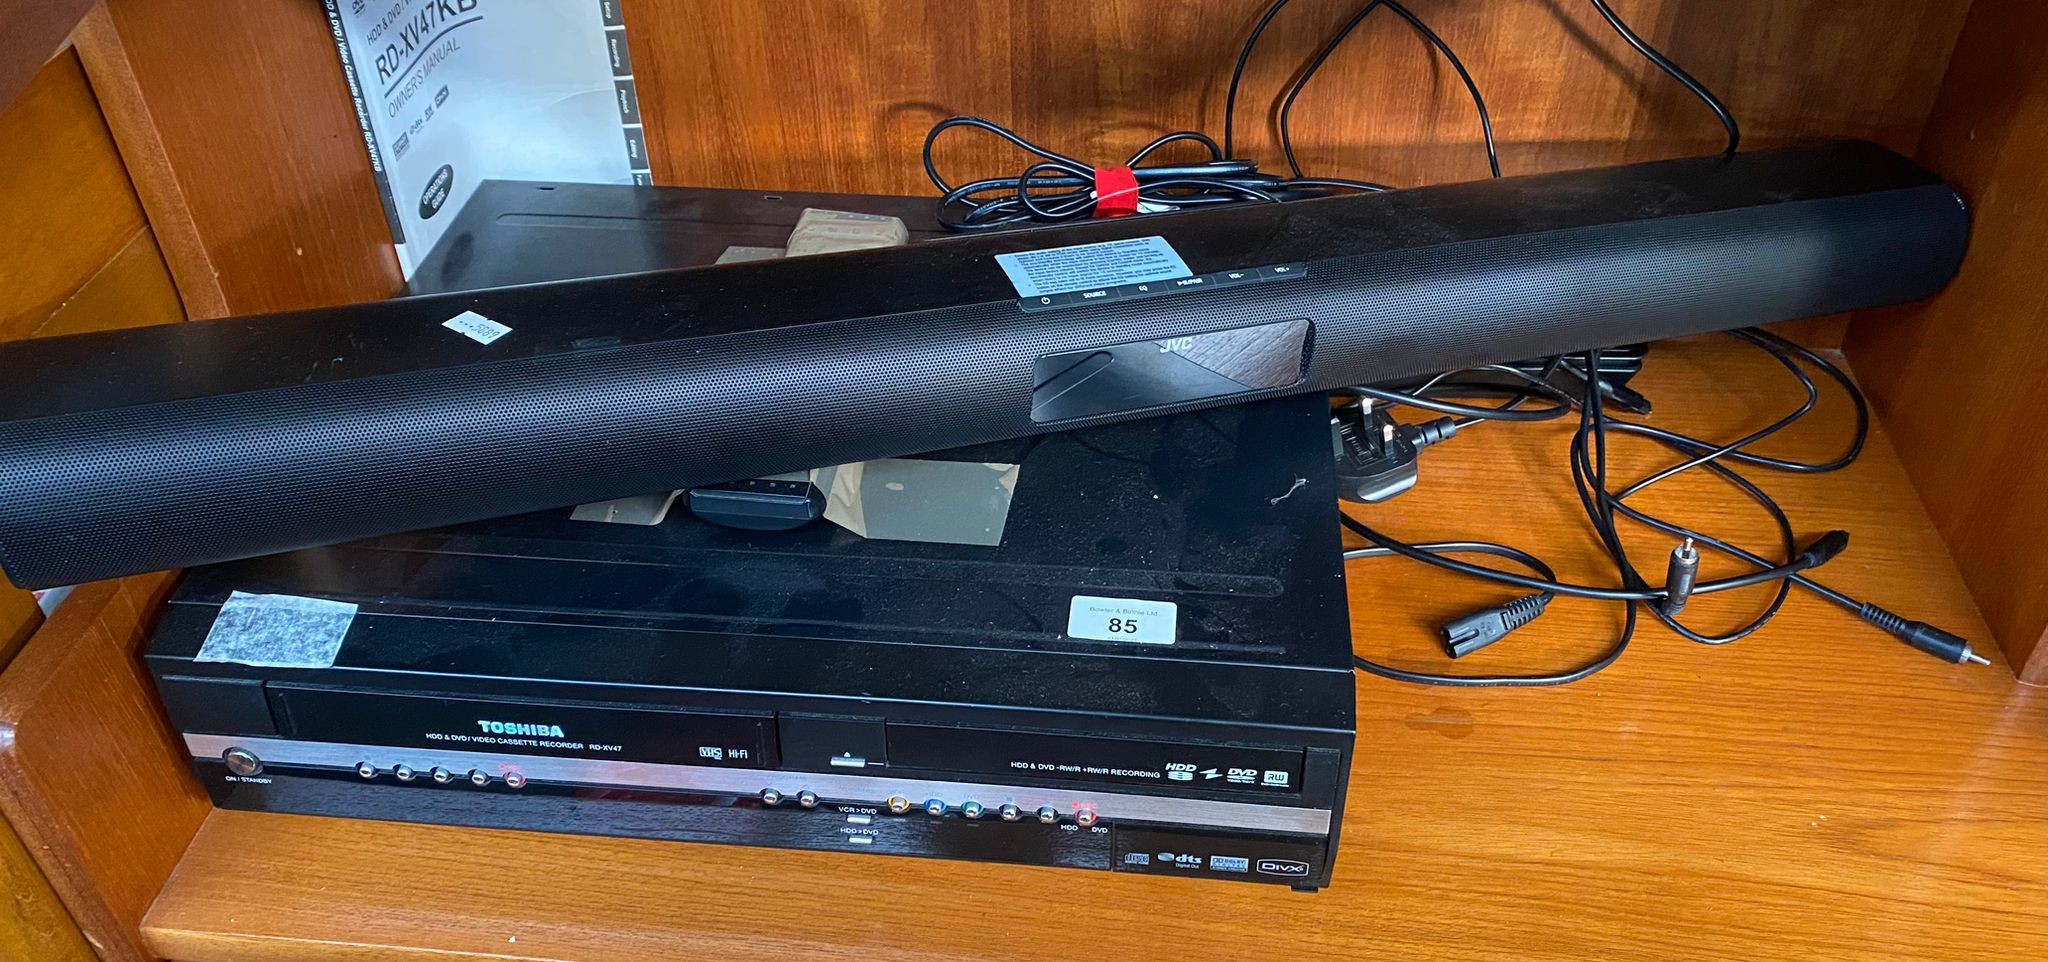 Toshiba HDD& dvd/video cassette recorder along with JVC sound bar - Image 2 of 2